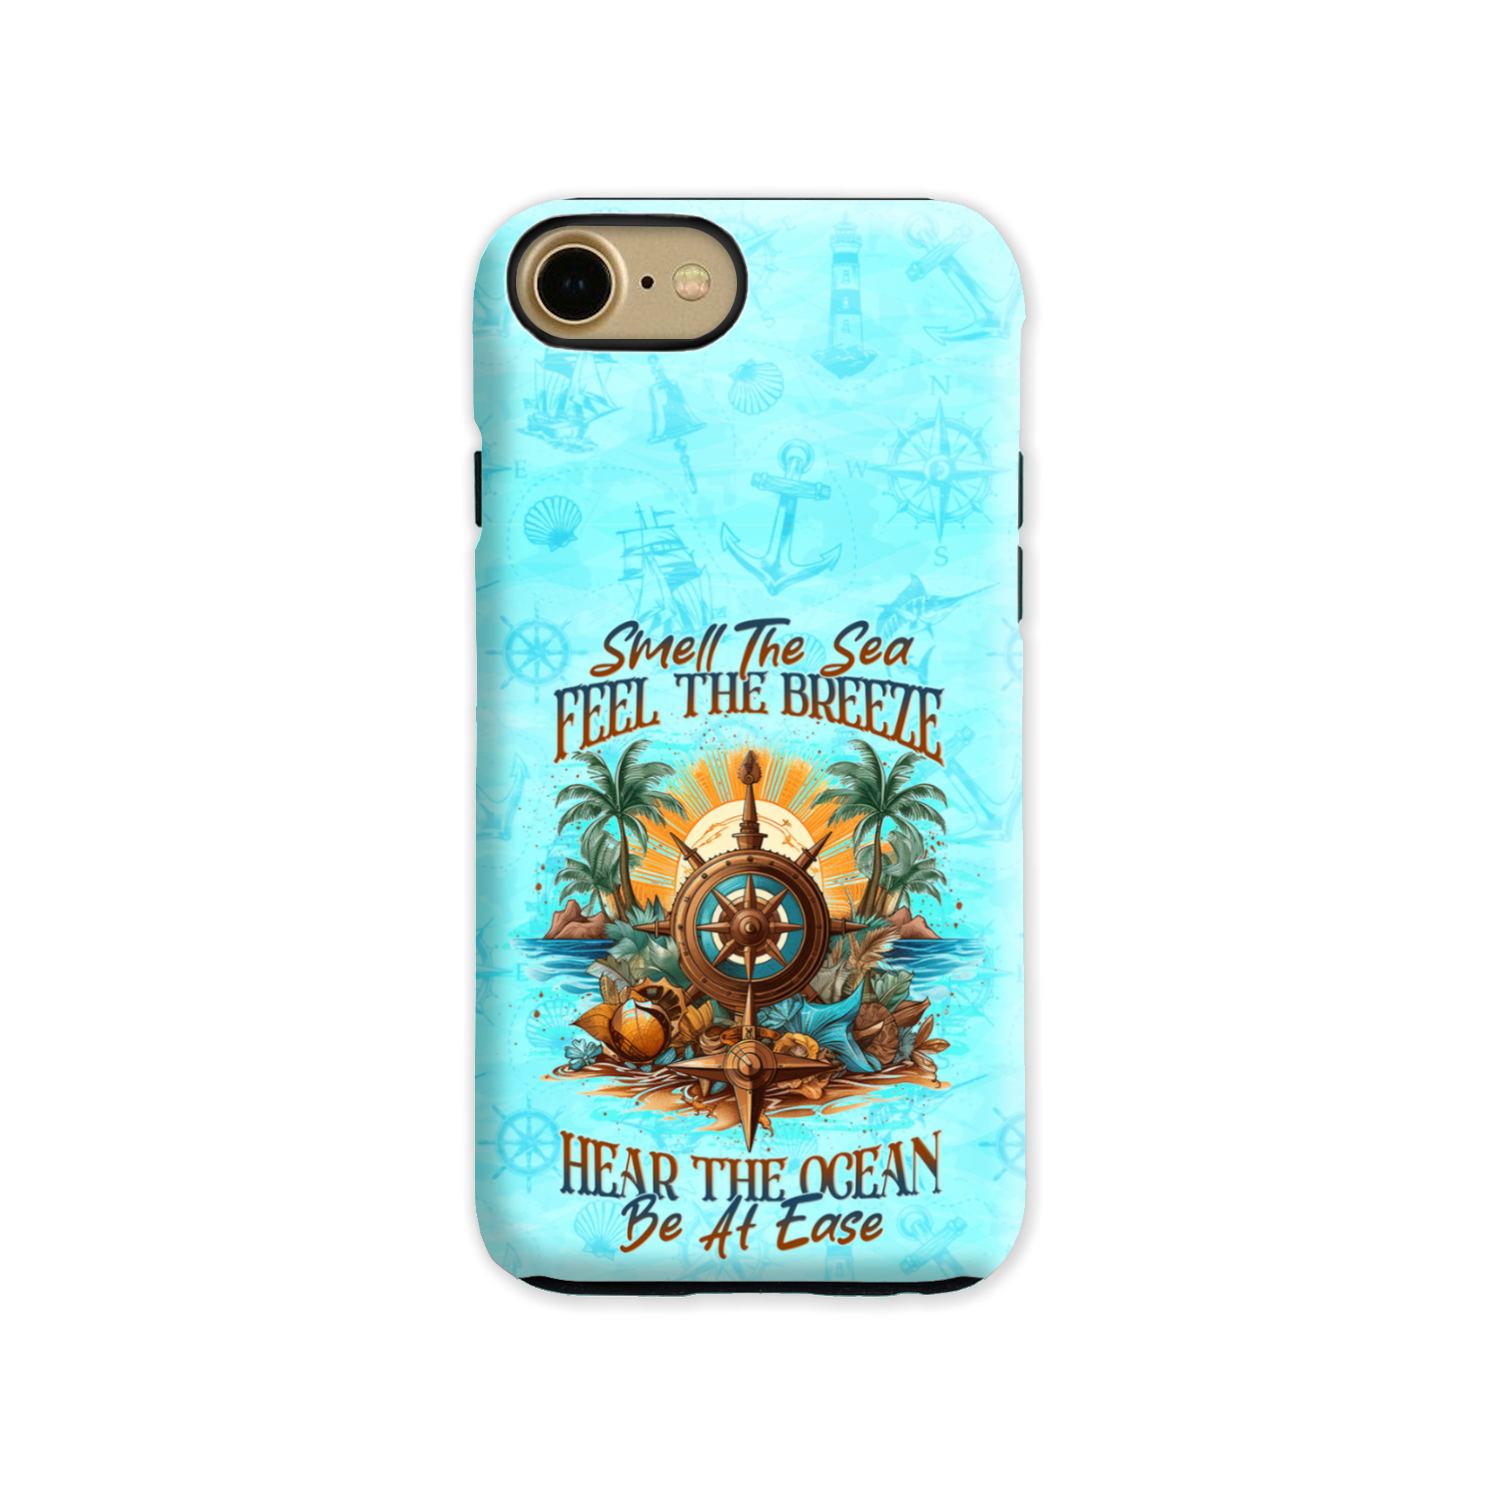 SMELL THE SEA FEEL THE BREEZE PHONE CASE - YHLN0906236